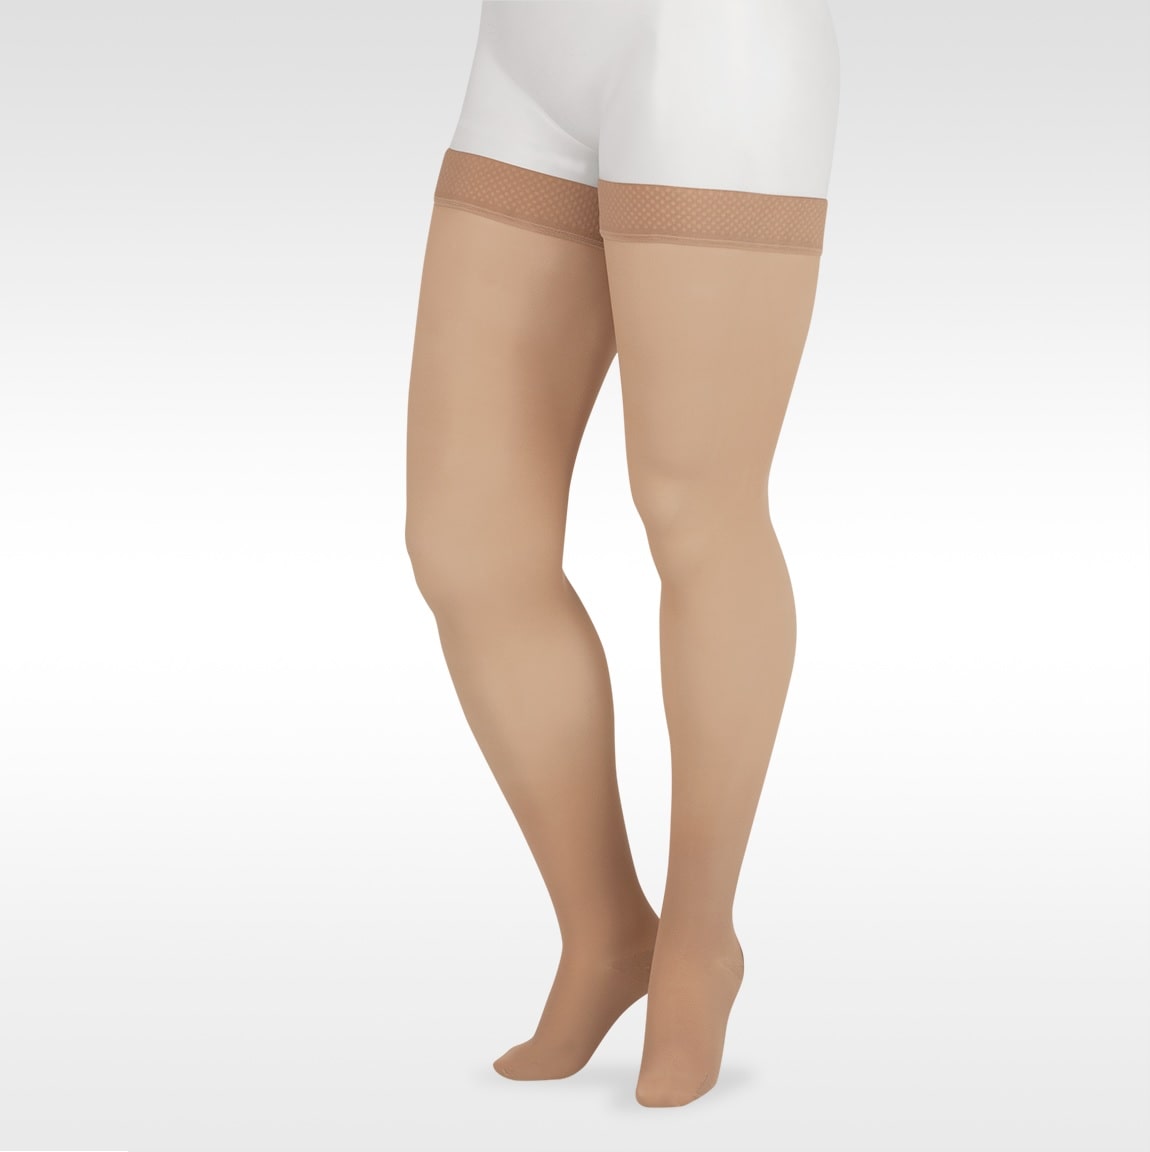 Soft Opaque, Thigh High Compression Stockings, Open Toe